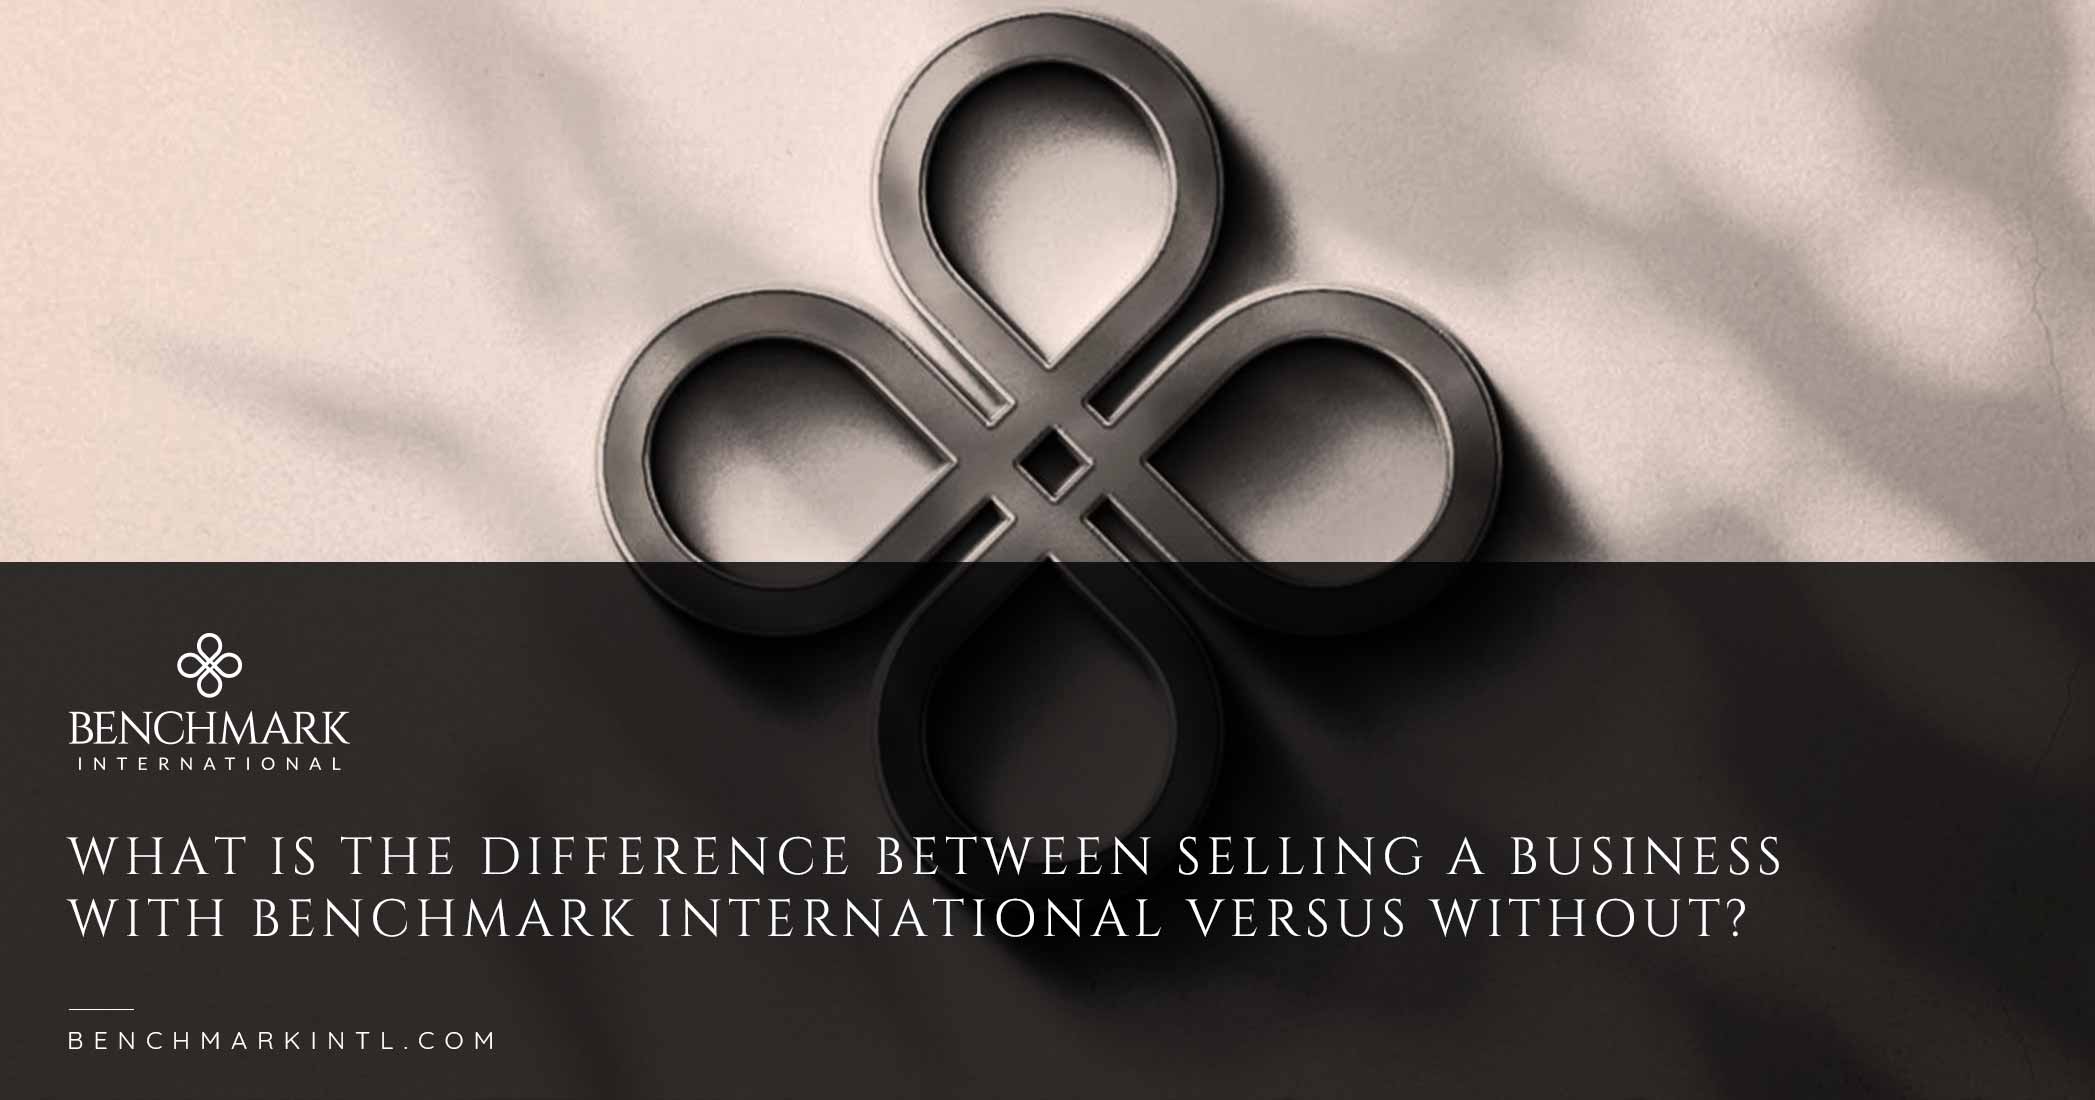 What Is The Difference Between Selling A Business With Benchmark International Versus Without?